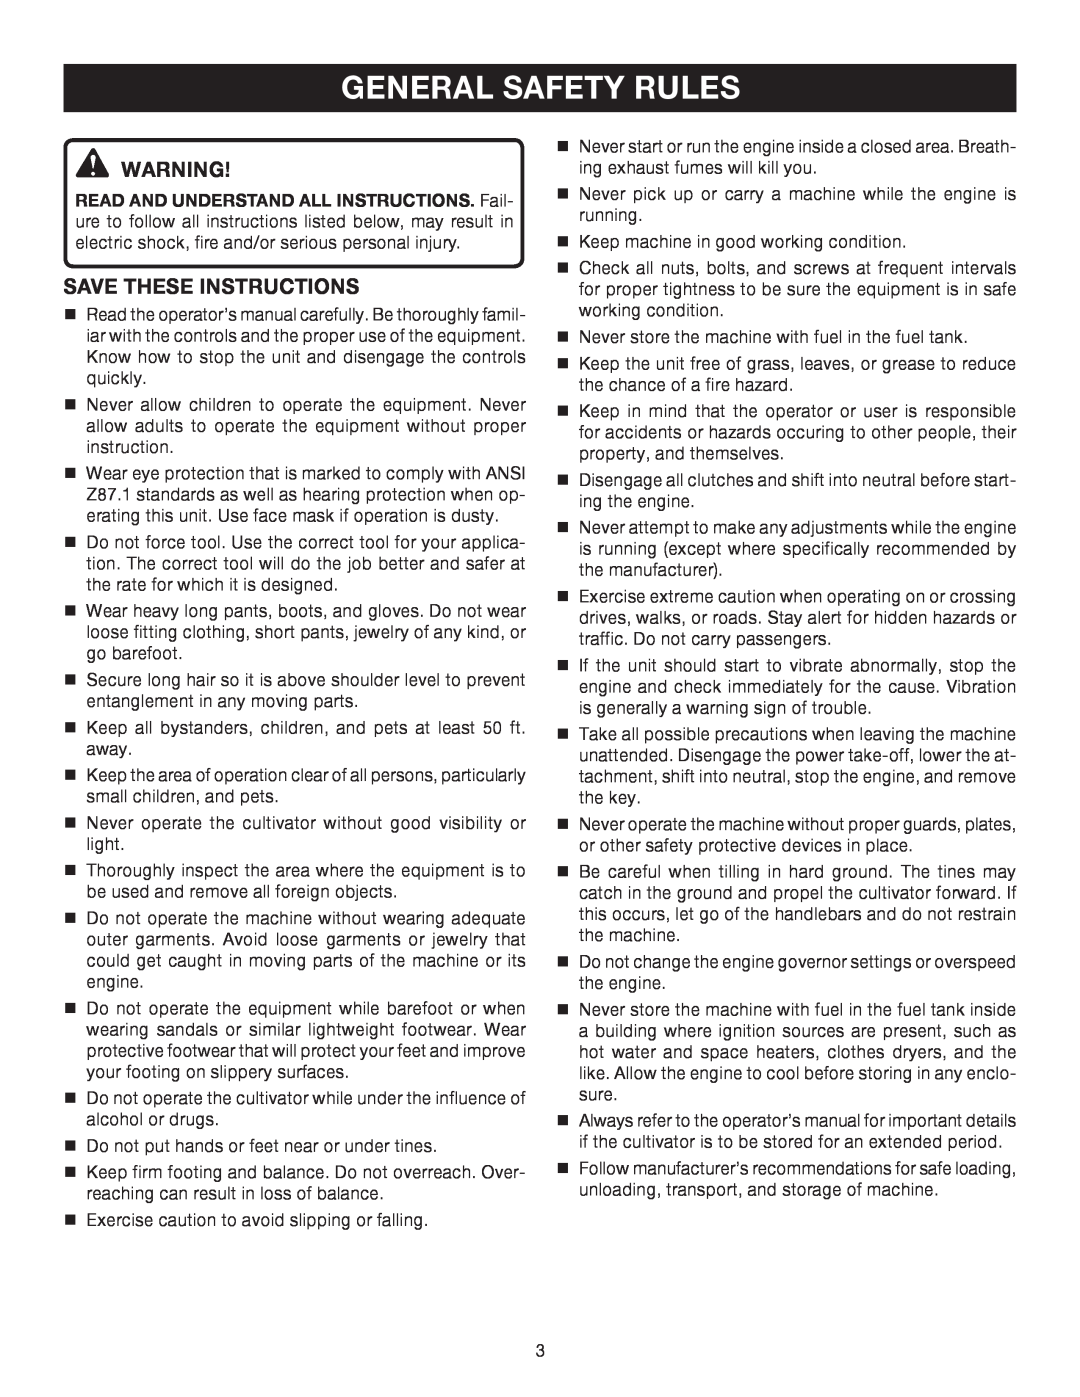 Ryobi RY60512 manual General Safety Rules, Save These Instructions 